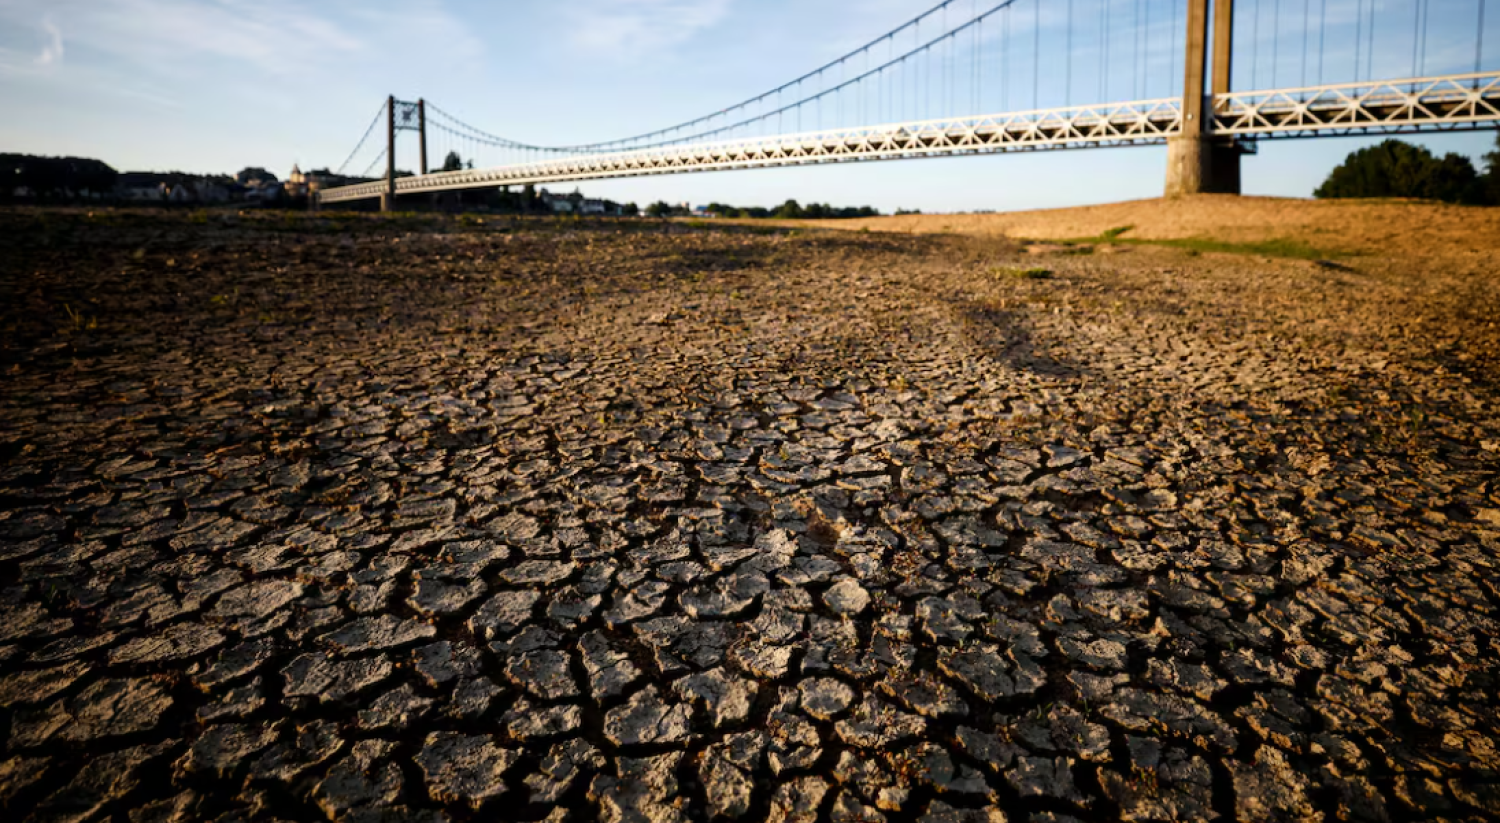 Cracked and dry earth is seen in the wide riverbed of the Loire River near the Anjou-Bretagne bridge as a heatwave hits Europe, in Ancenis-Saint-Gereon, France, June 13, 2022. REUTERS/Stephane Mahe/File Photo Purchase Licensing Rights